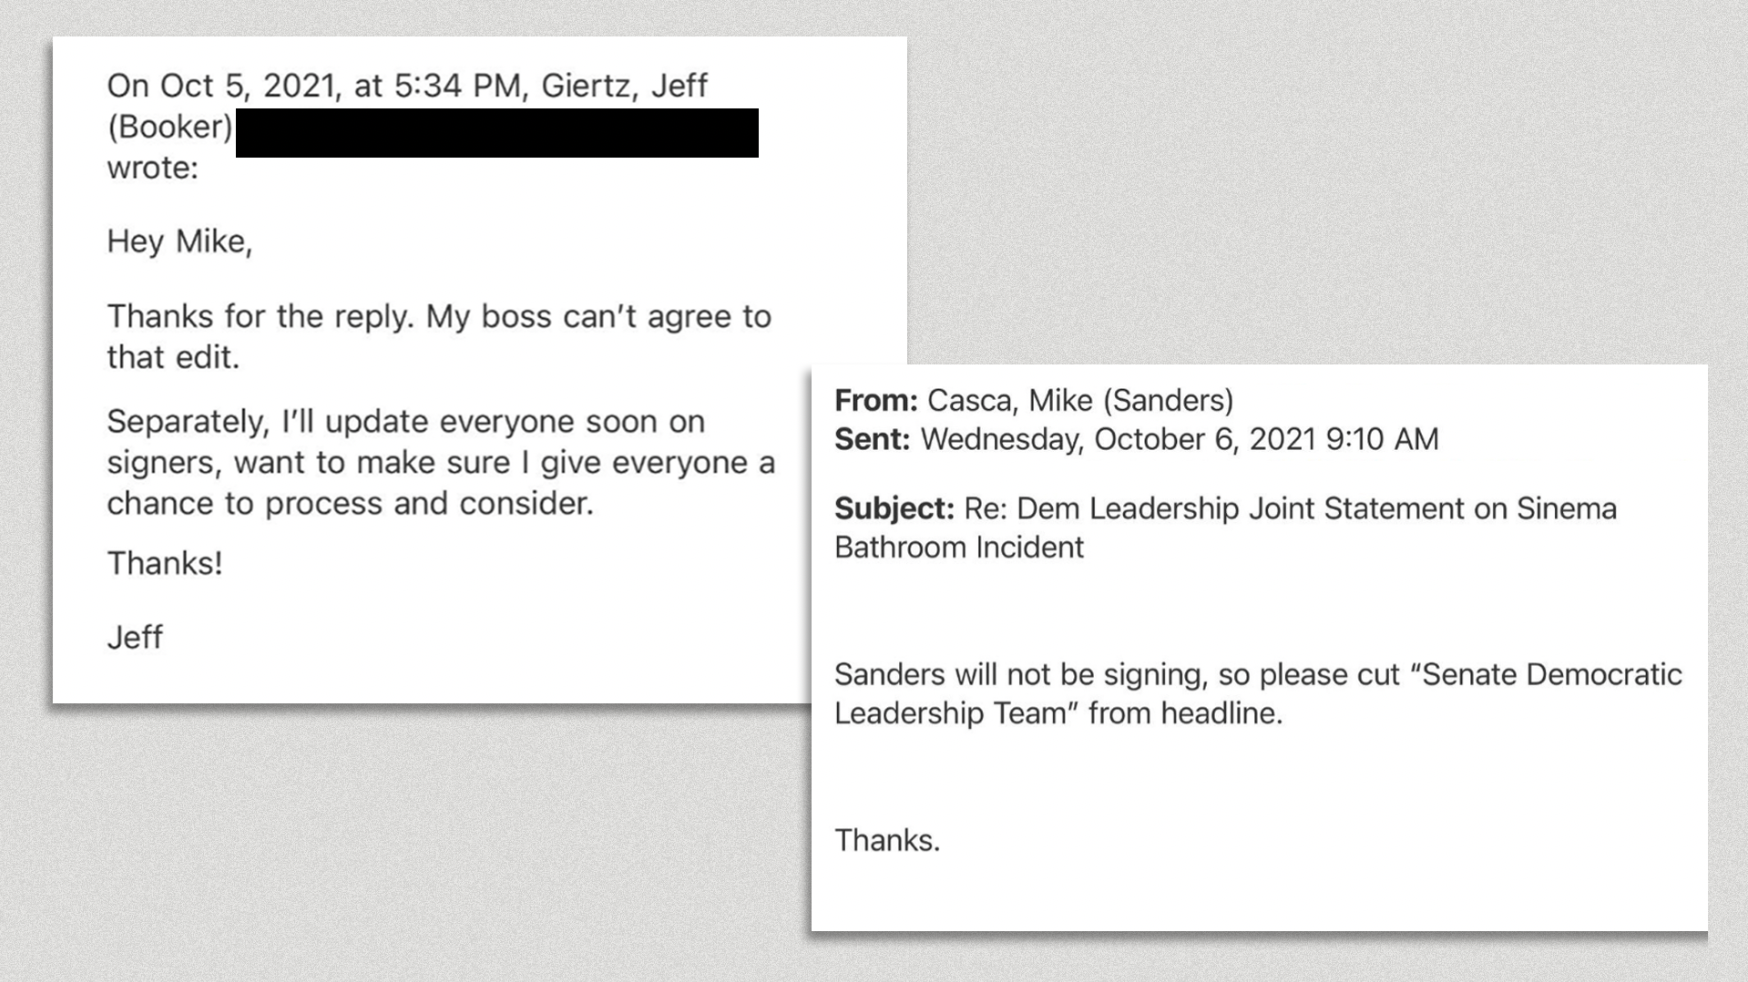 Screenshots the email exchange, obtained by Axios.